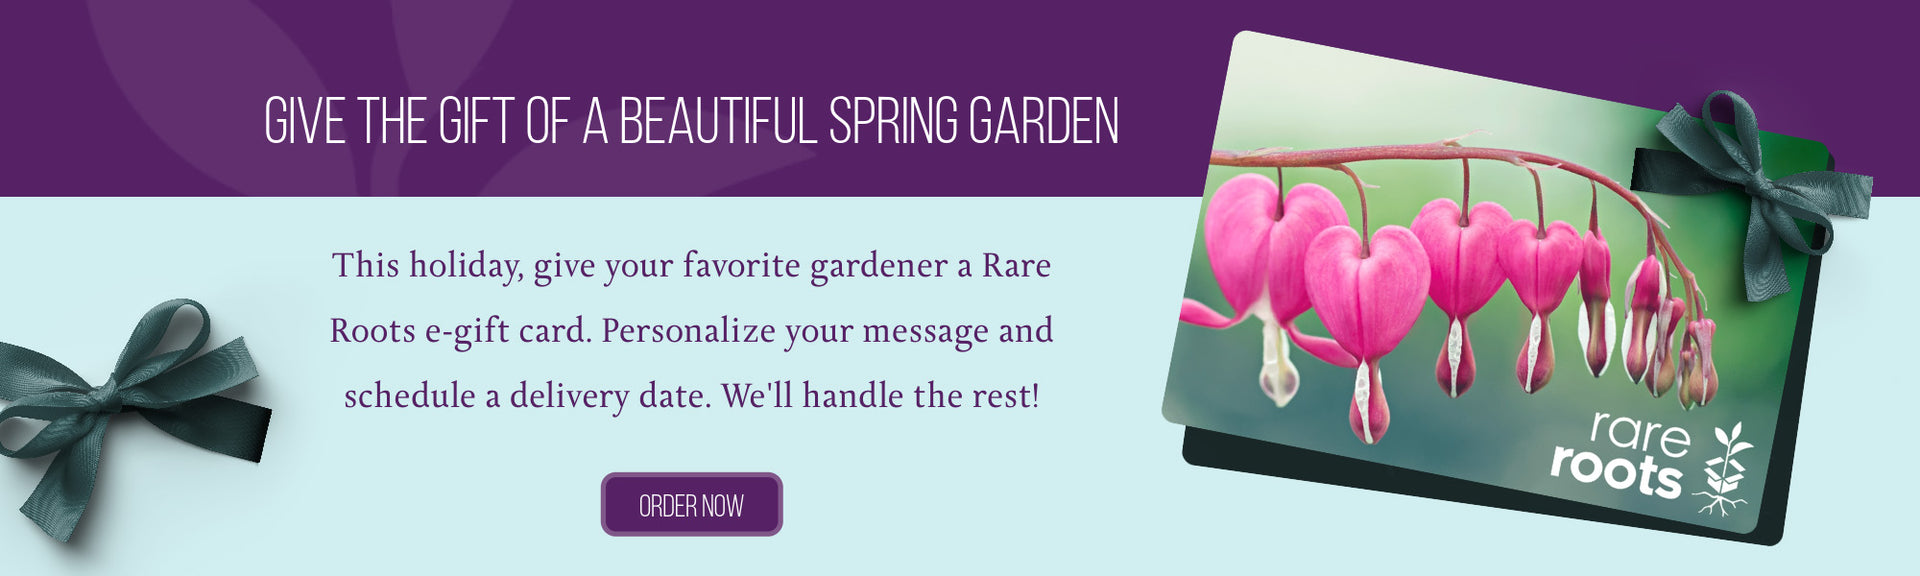 Give the gift of a beautiful spring garden. This holiday give your favorite gardener a Rare Roots e-gift card. Personalize your message and schedule your delivery day. We'll handle the rest.